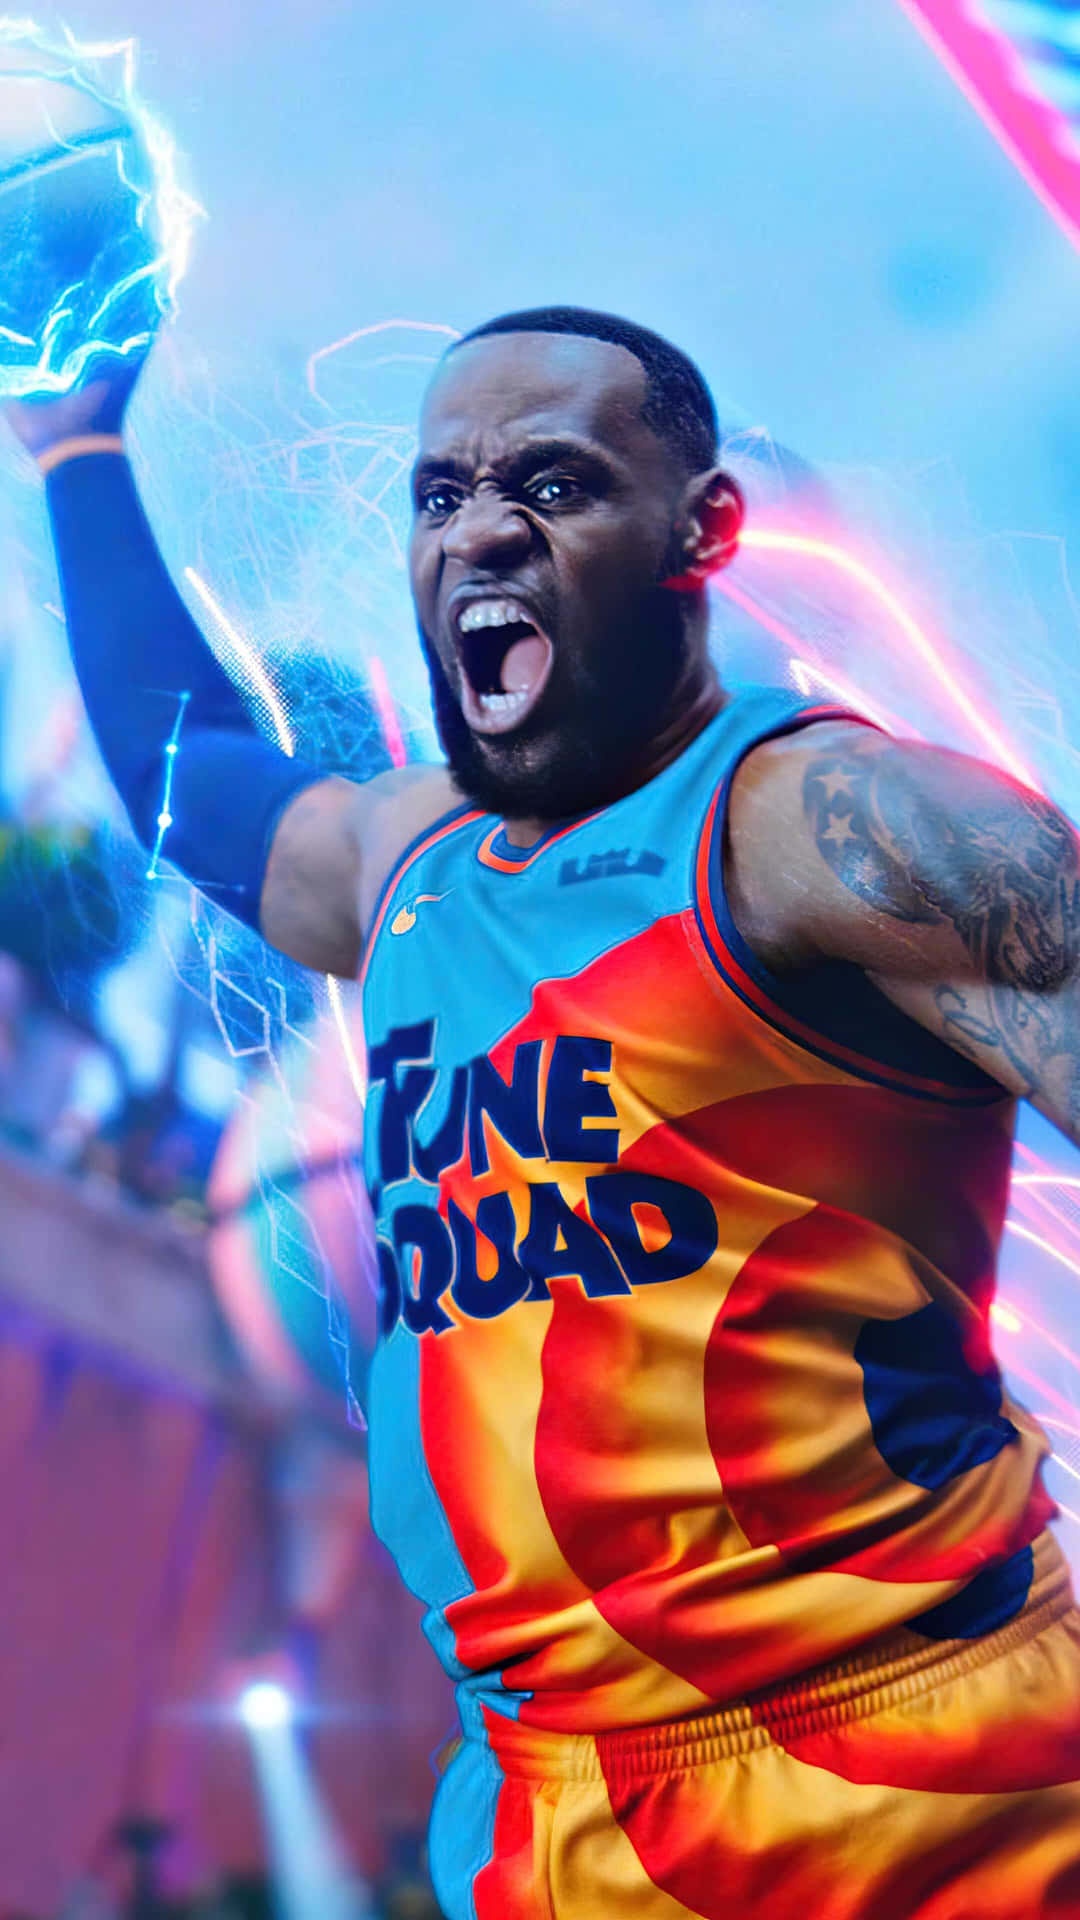 Download The Tune Squad on the court - ready to take on the Monstars!  Wallpaper